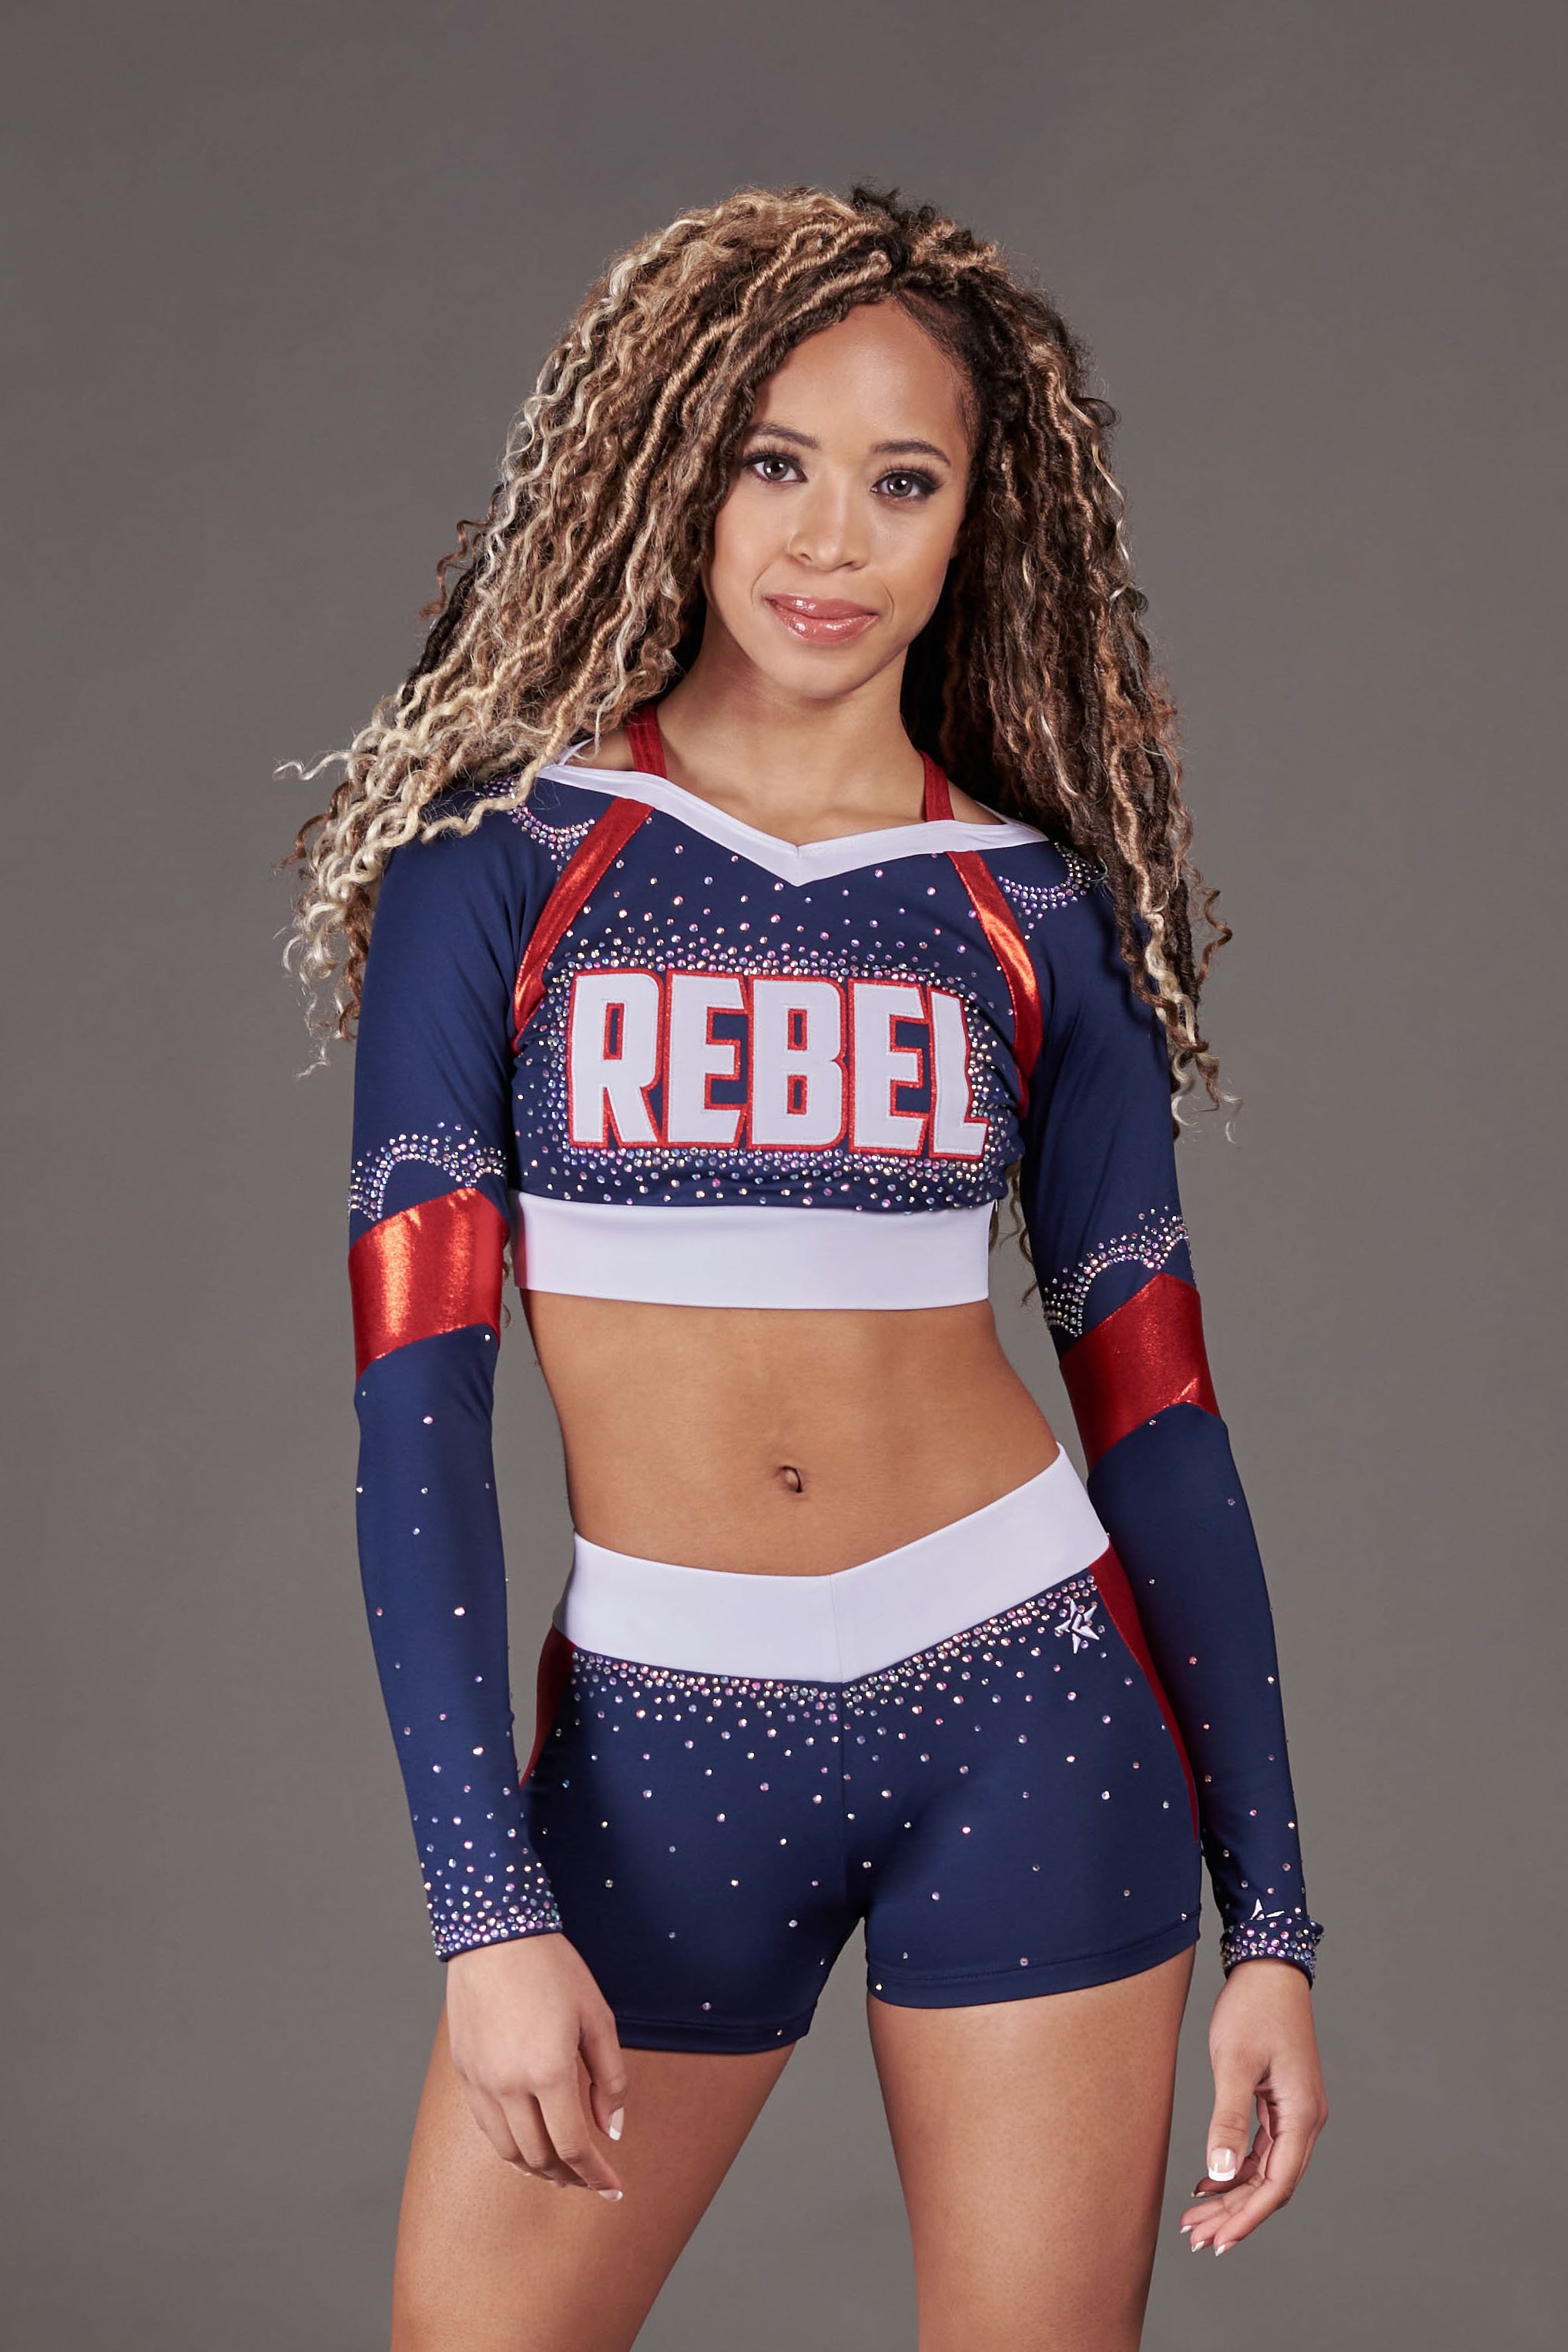 REBEL MARK COLLECTION — Allstar Cheer Uniforms from Rebel Athletic